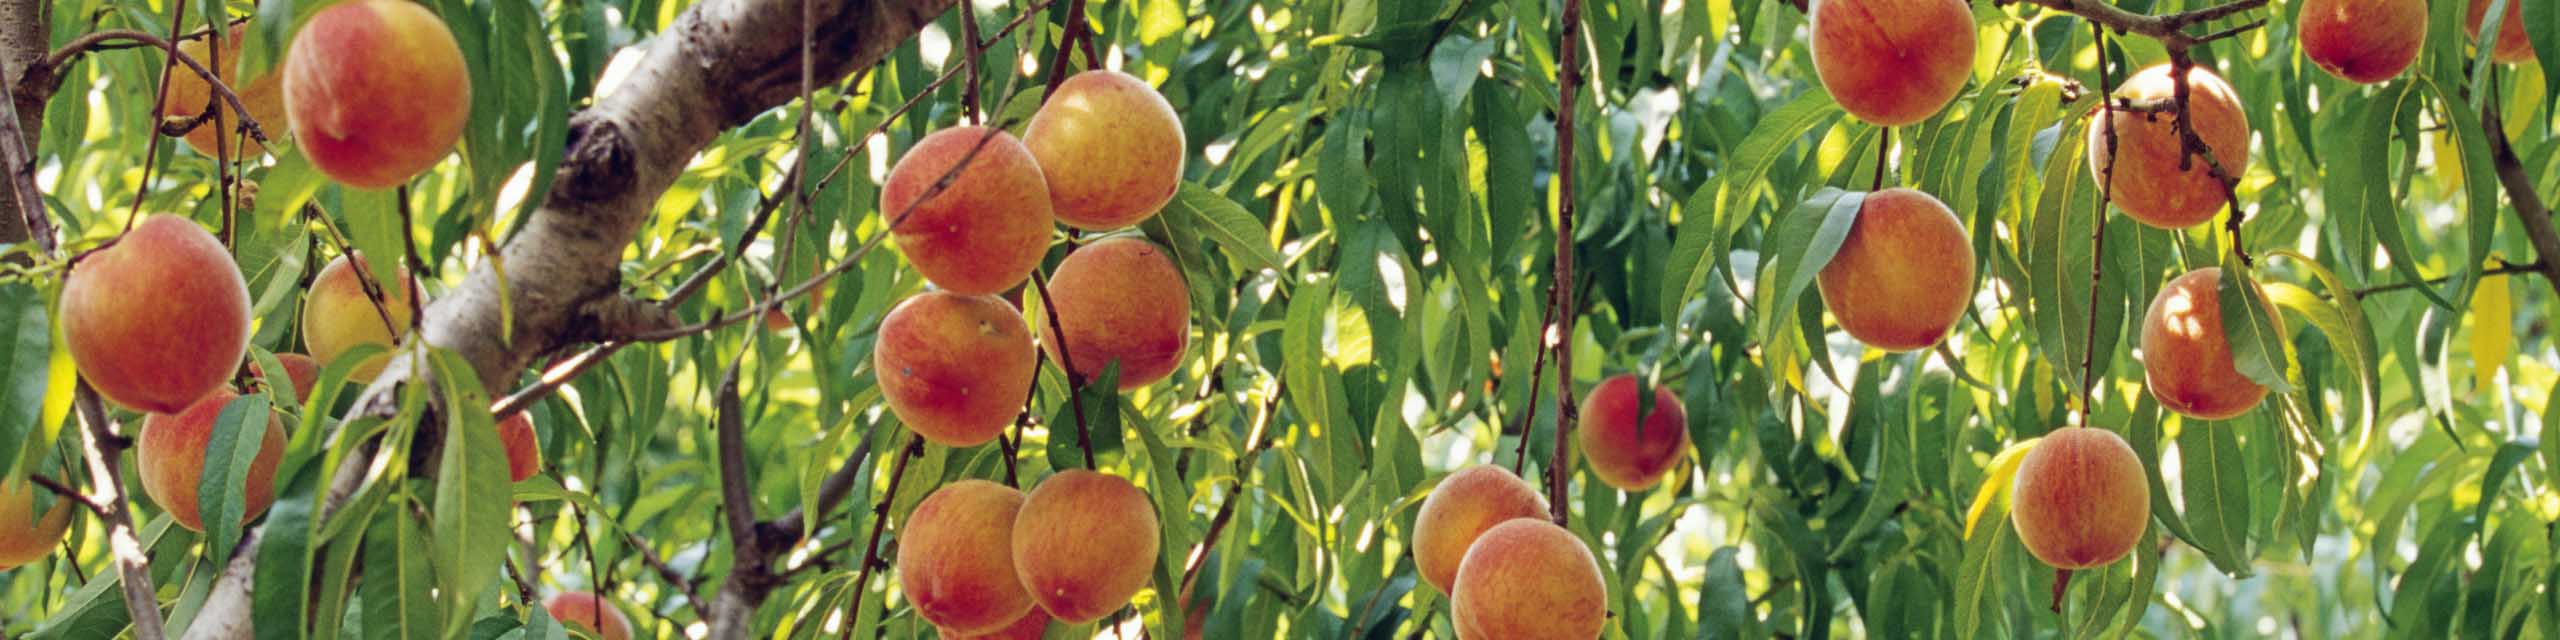 Ripe peaches hanging on the tree.